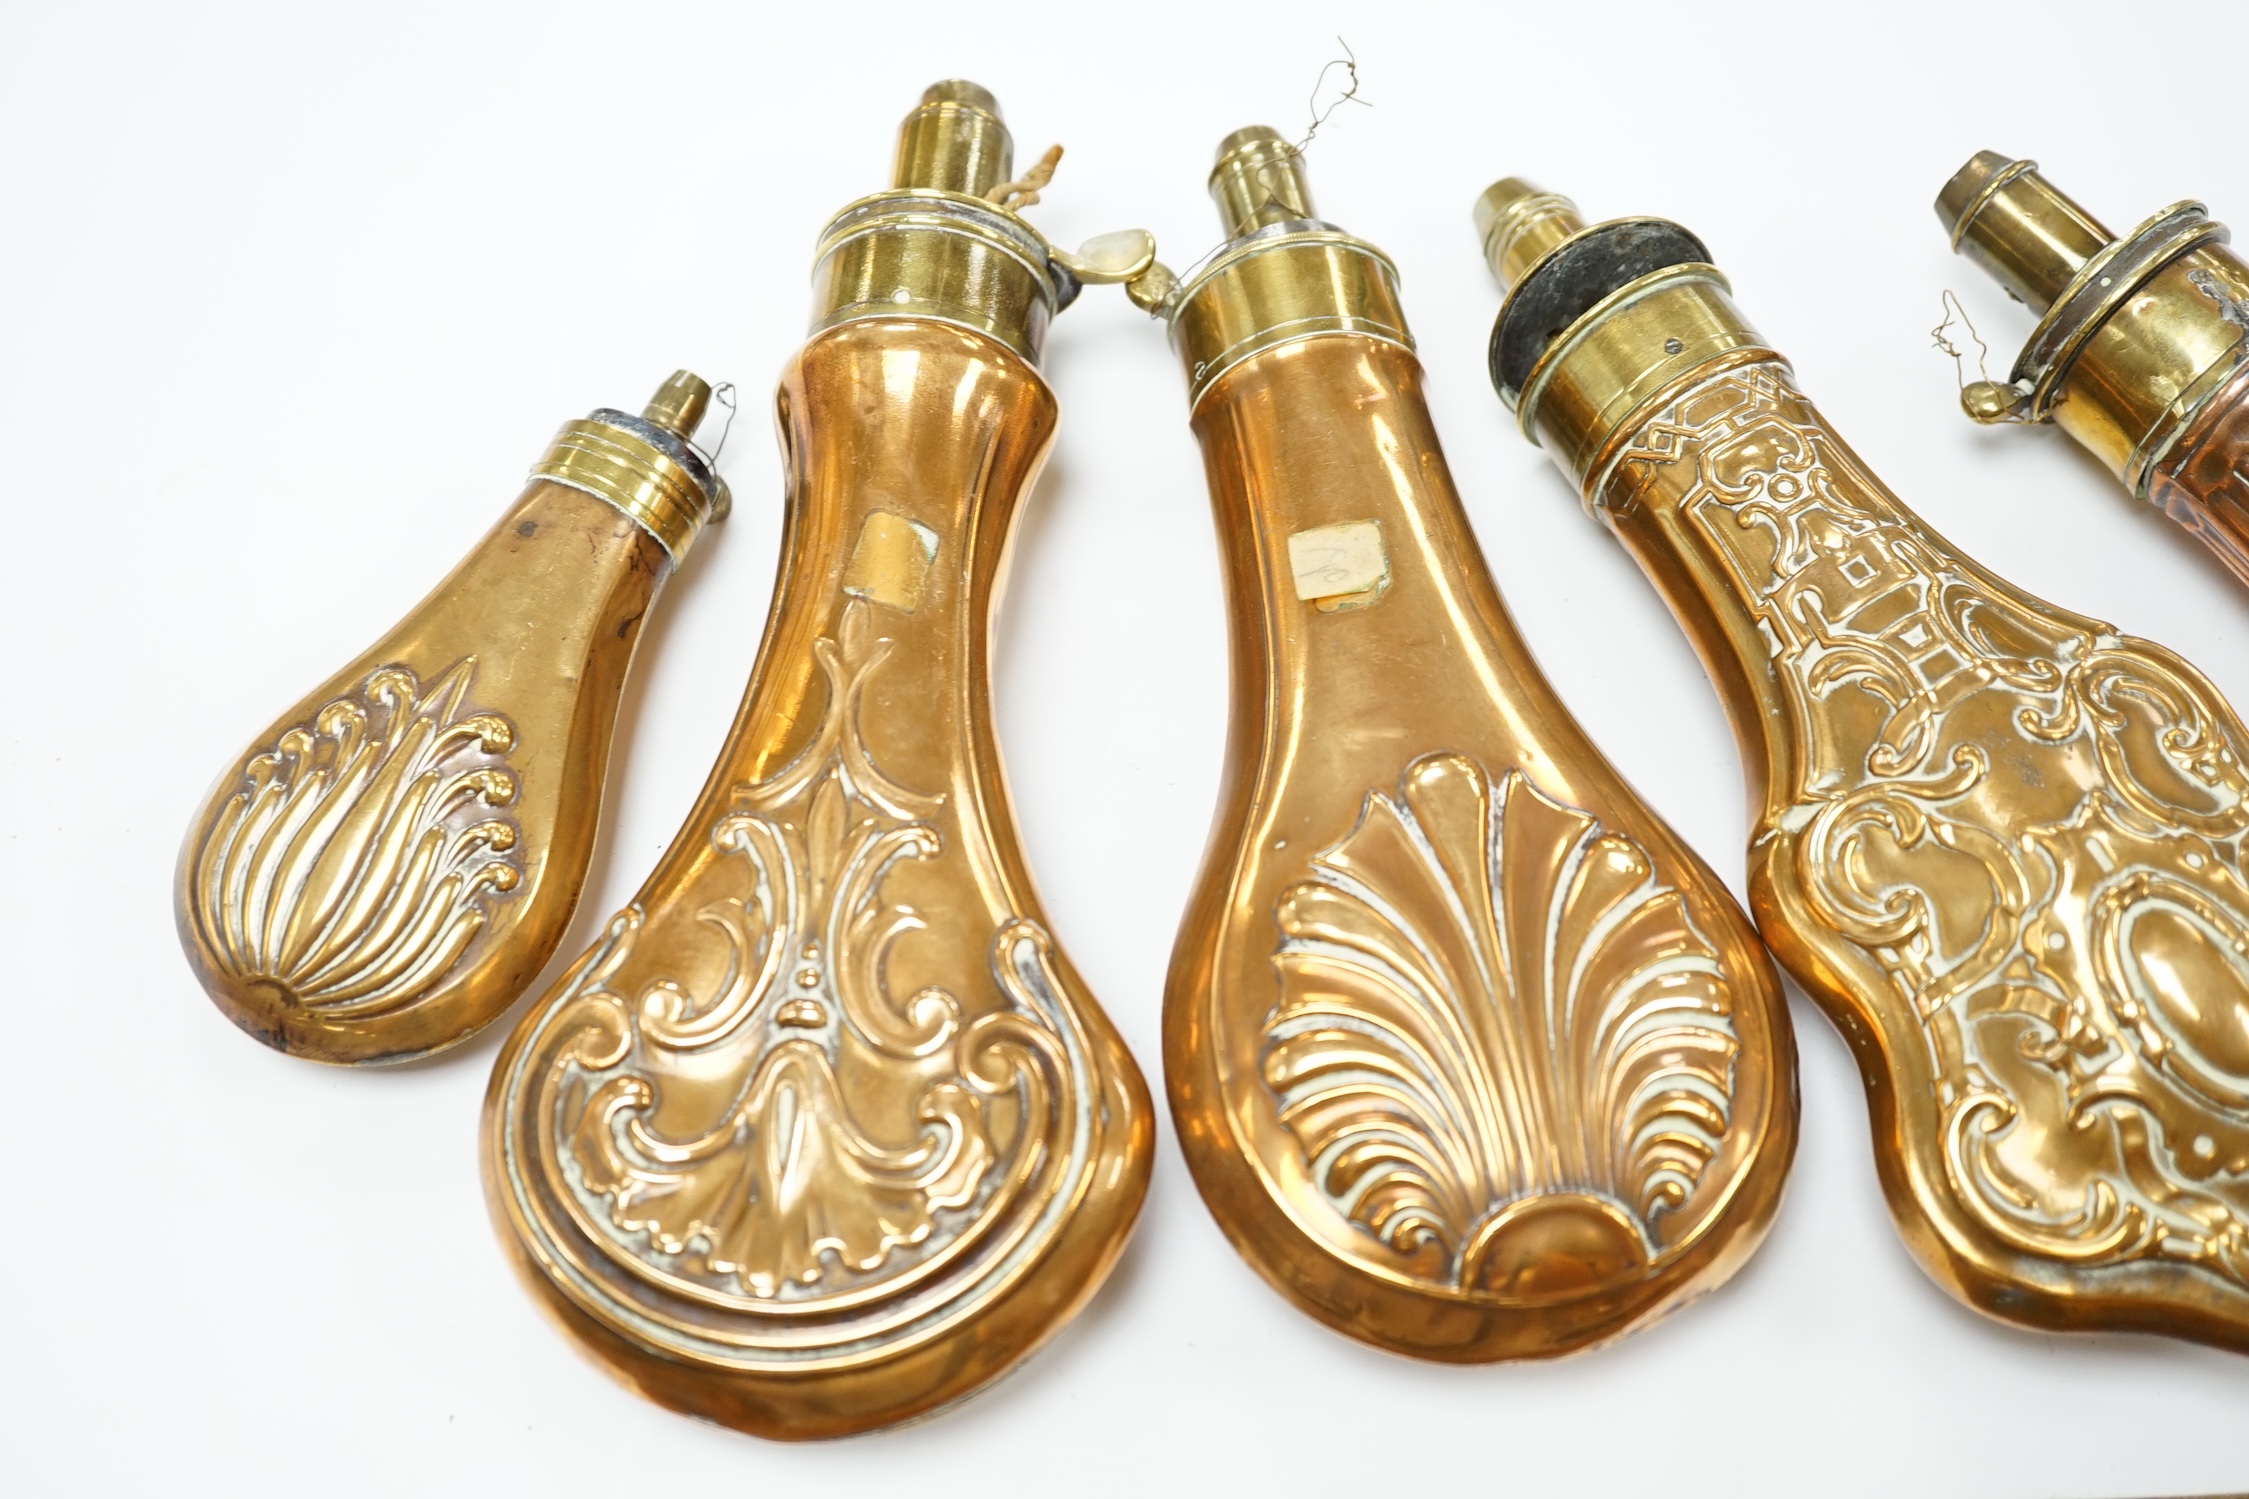 Five 19th century copper and brass powder flasks, all with embossed decoration to the bodies. Condition - fair